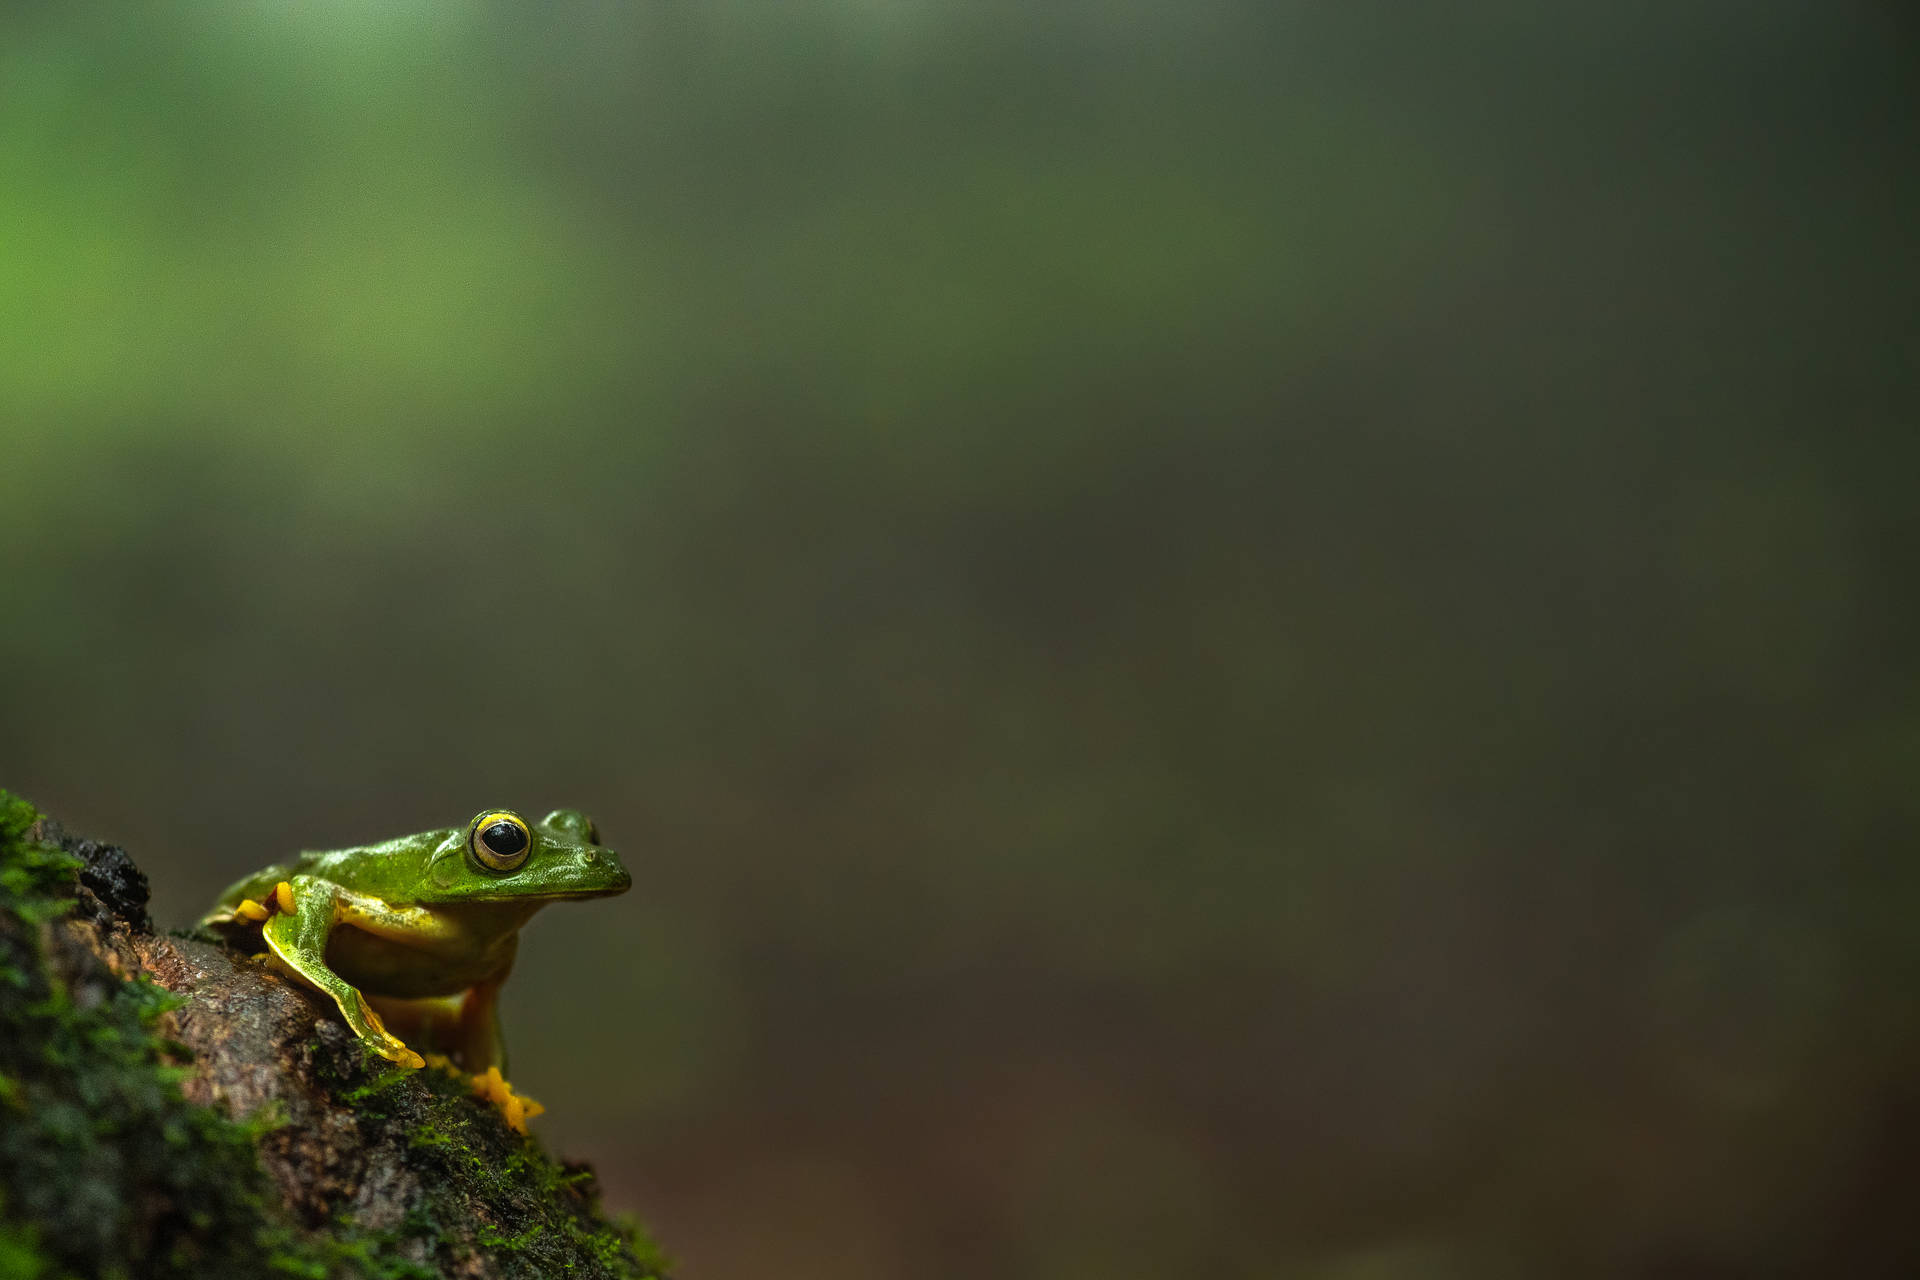 Frog 5568X3712 Wallpaper and Background Image